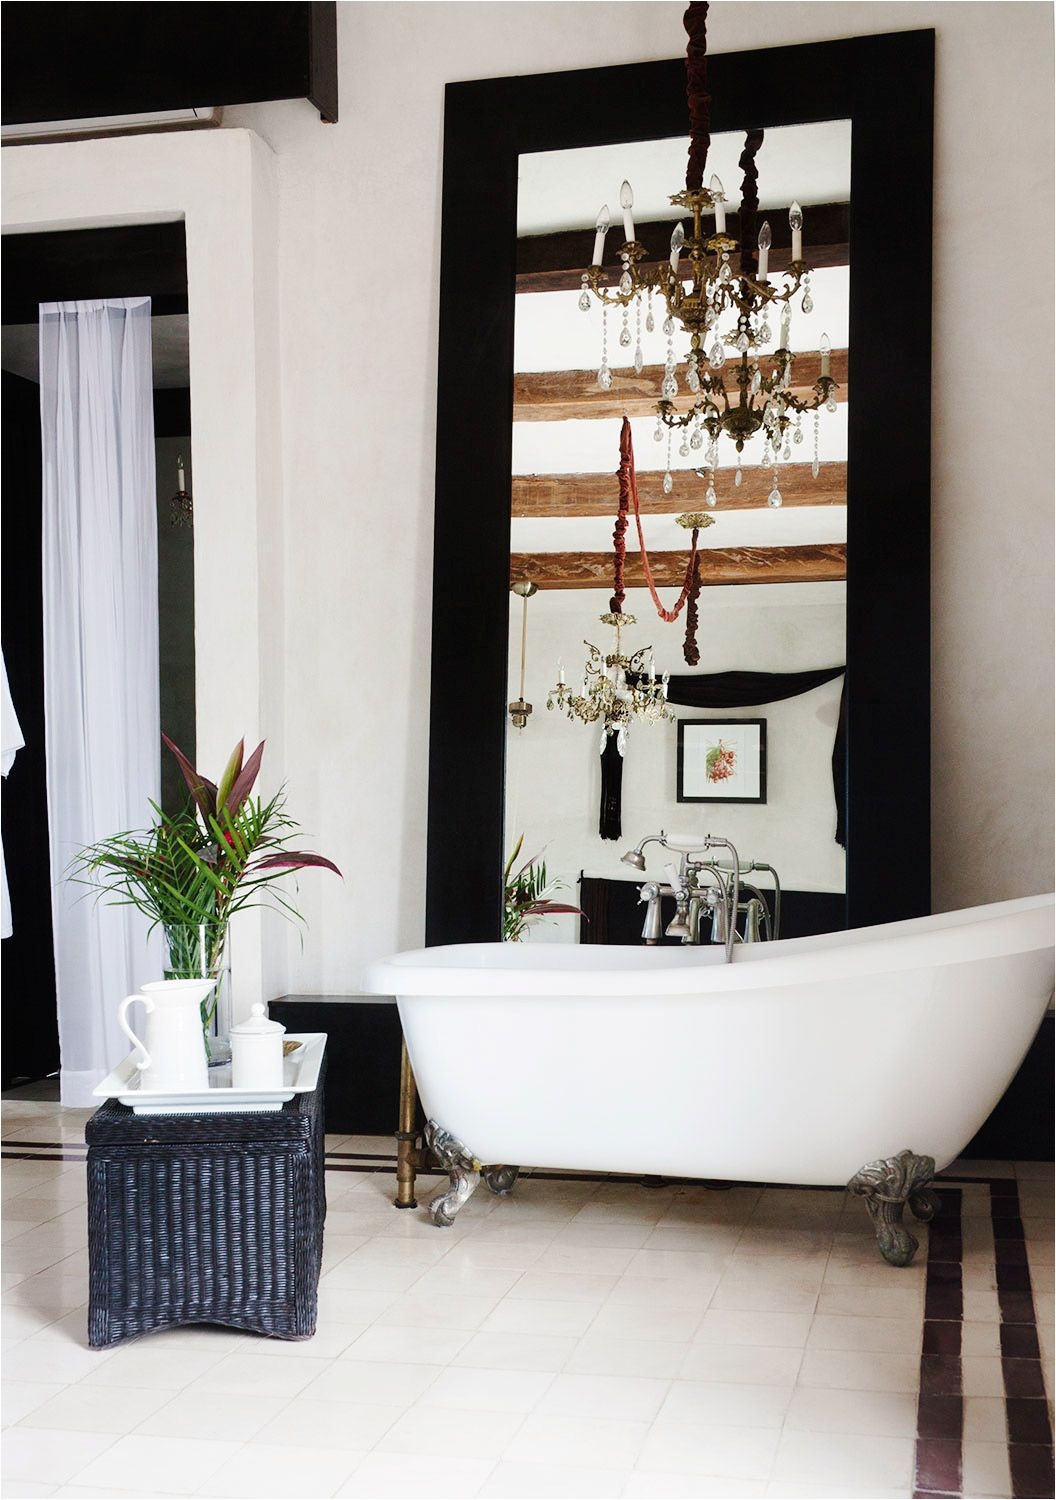 Beautiful bathroom with white tub and exposed wood ceilings